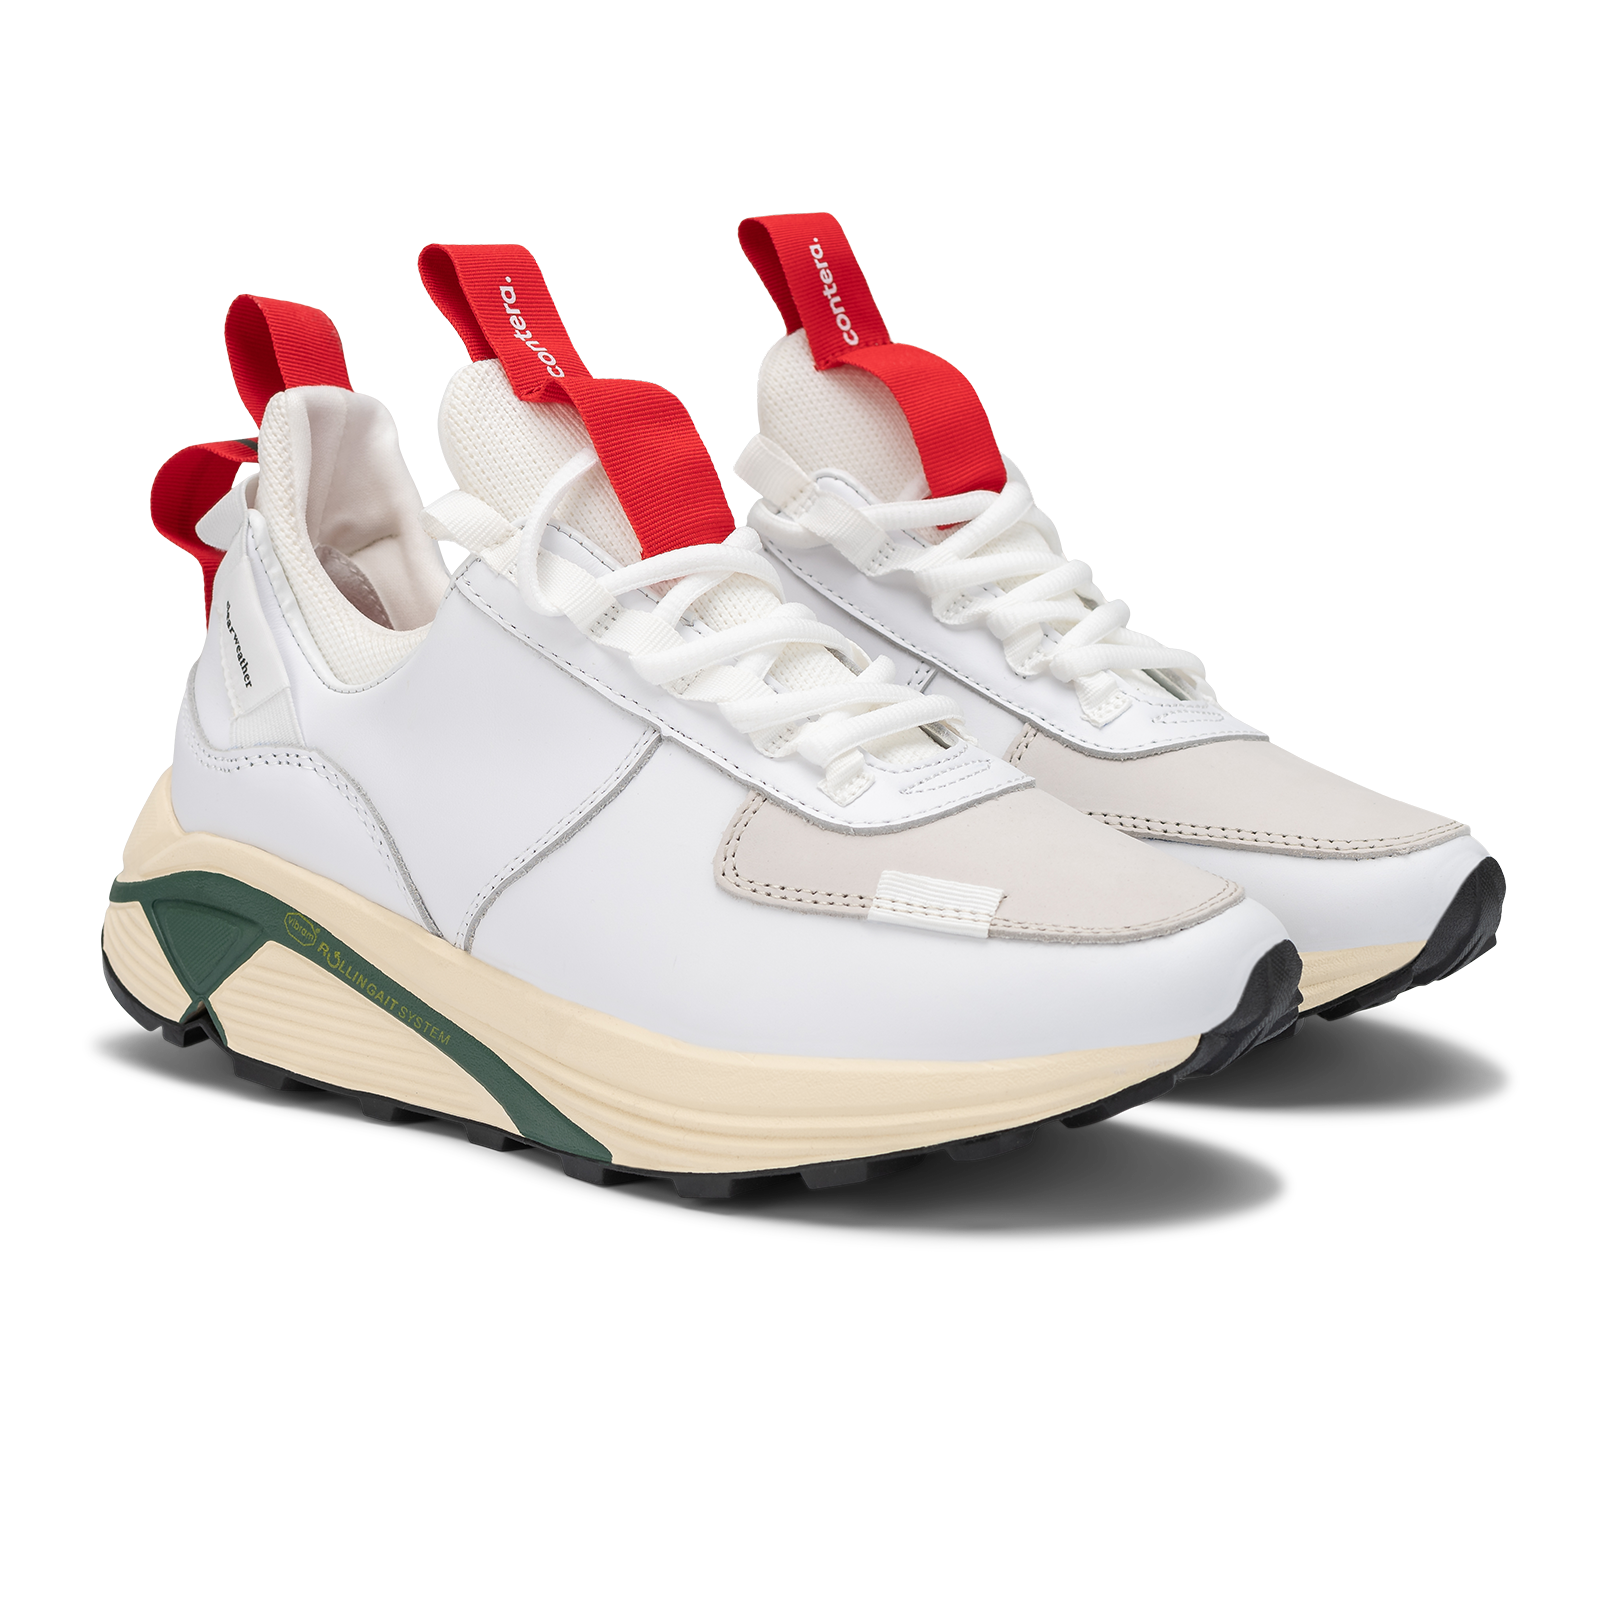 Top 3/4 view, Contera Cloud Forest is a runner with White fullgrain and Nubuck leather overlays White stretch mesh underlays, Red webbing heel and tongue pull, webbing lace system gream and green Virbam midsole and black vibram rubber outsole.